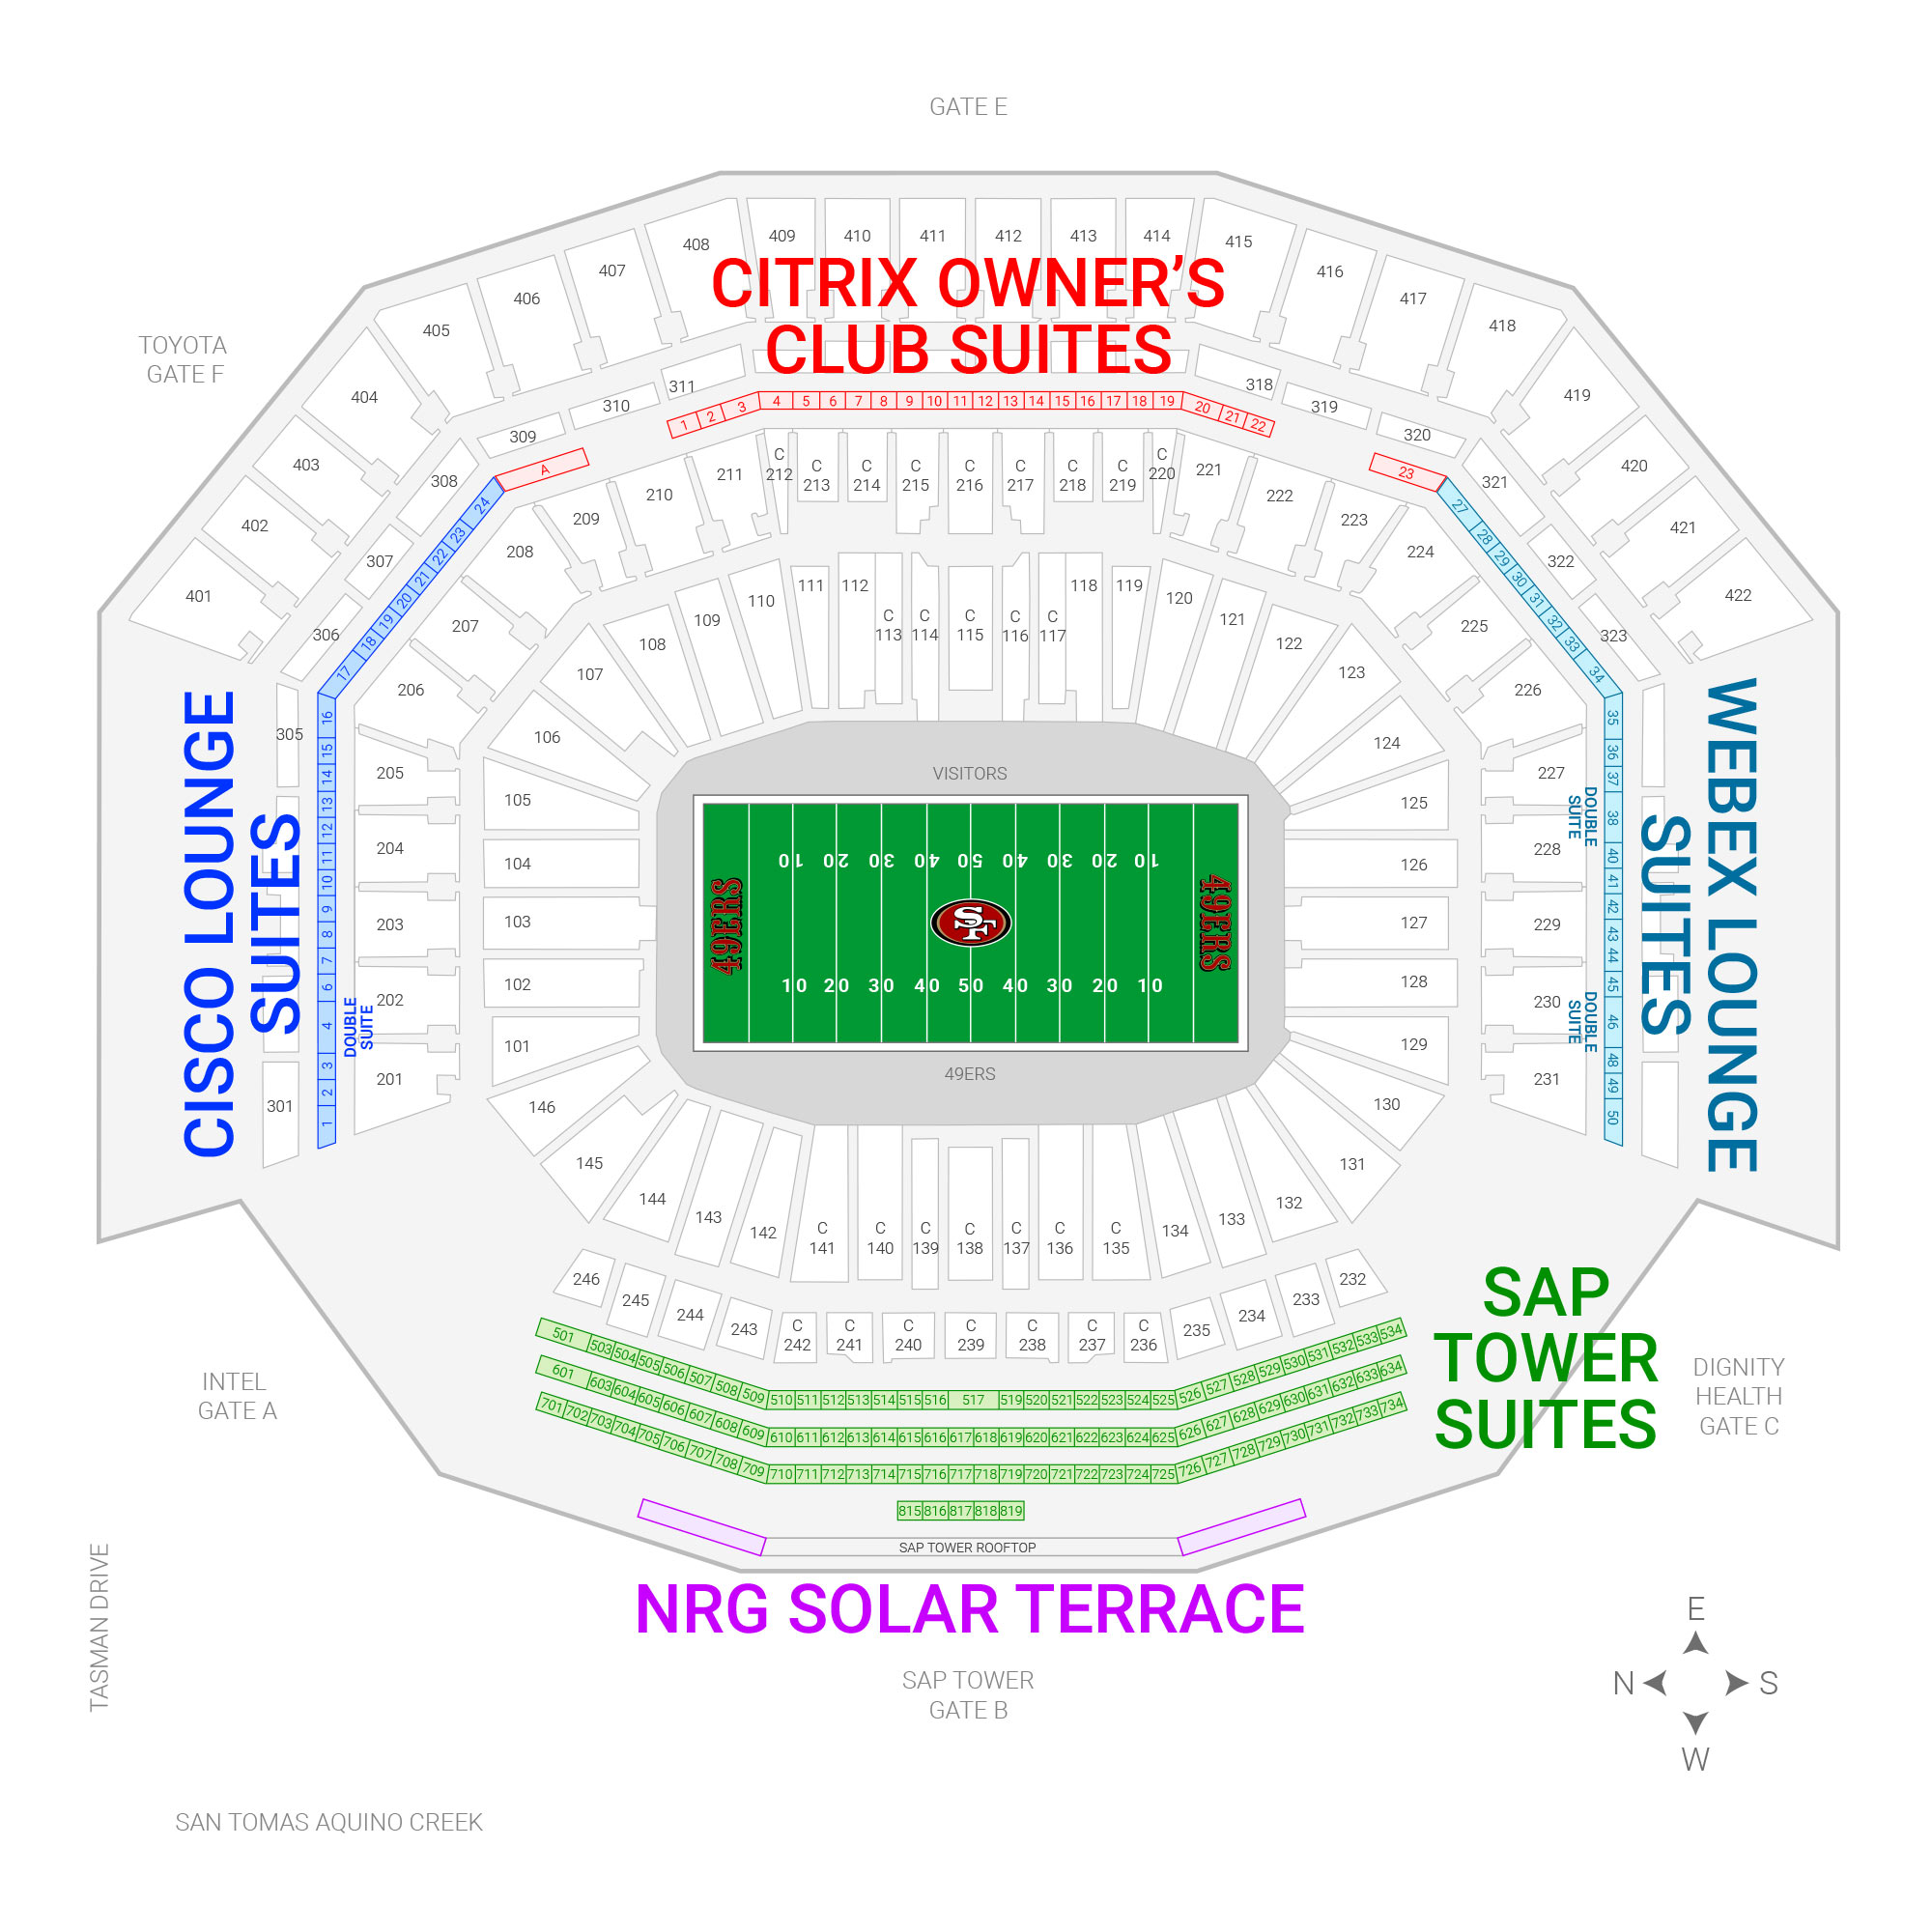 Levi's Stadium / San Francisco 49ers Suite Map and Seating Chart